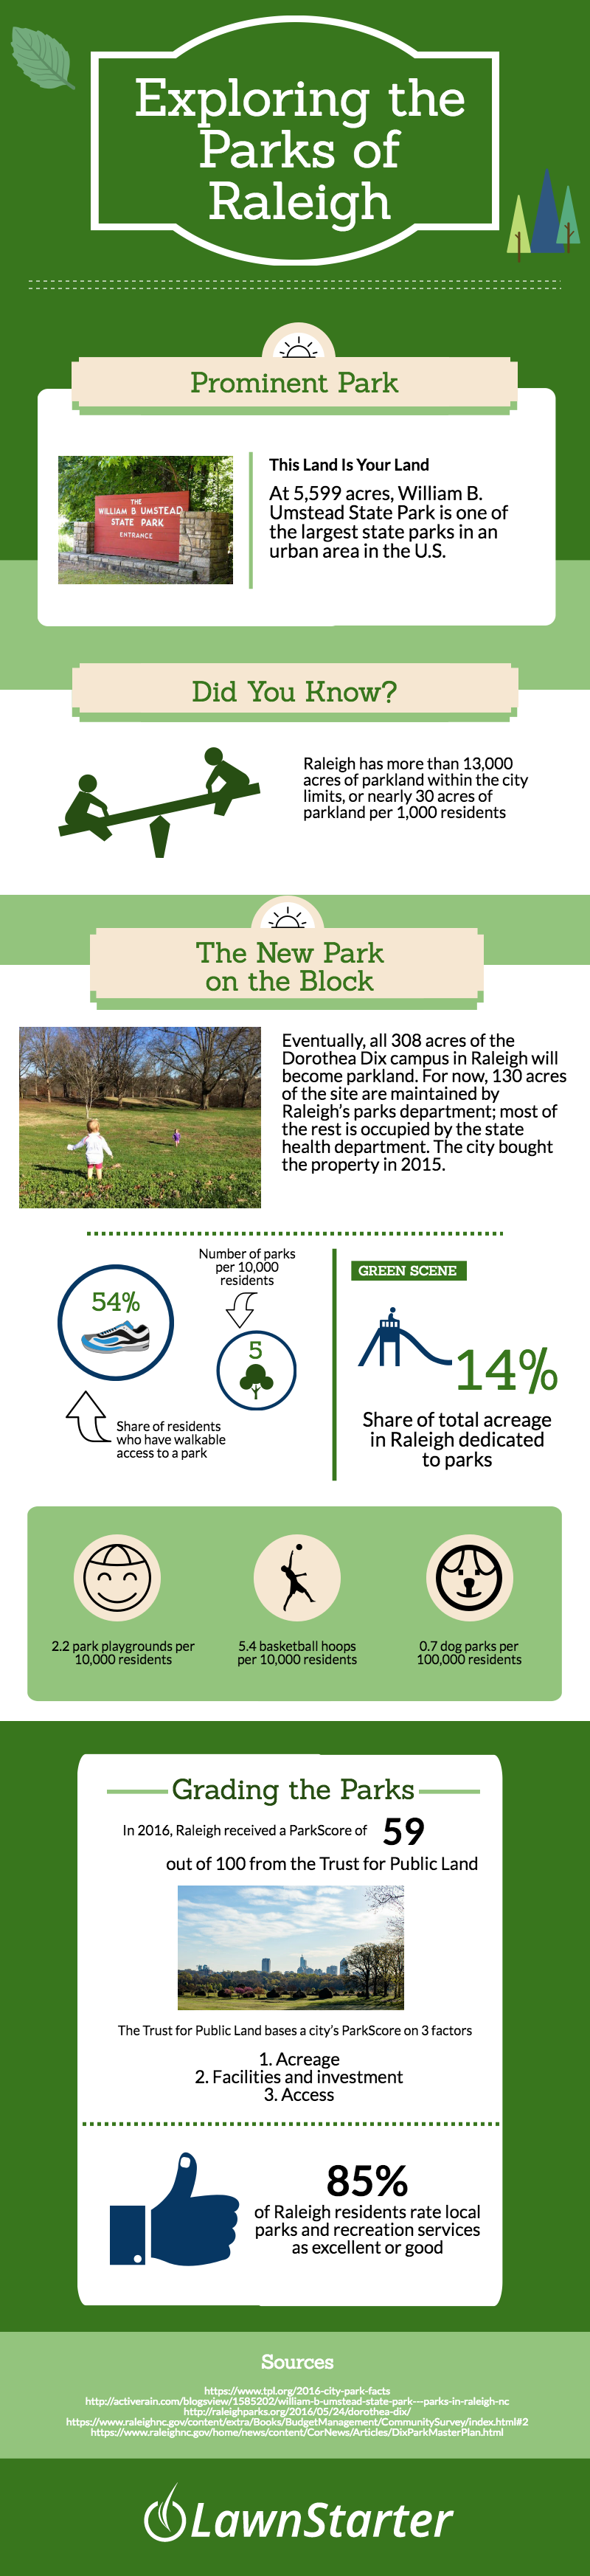 An Exploration of the Parks in Raleigh, NC [Infographic]